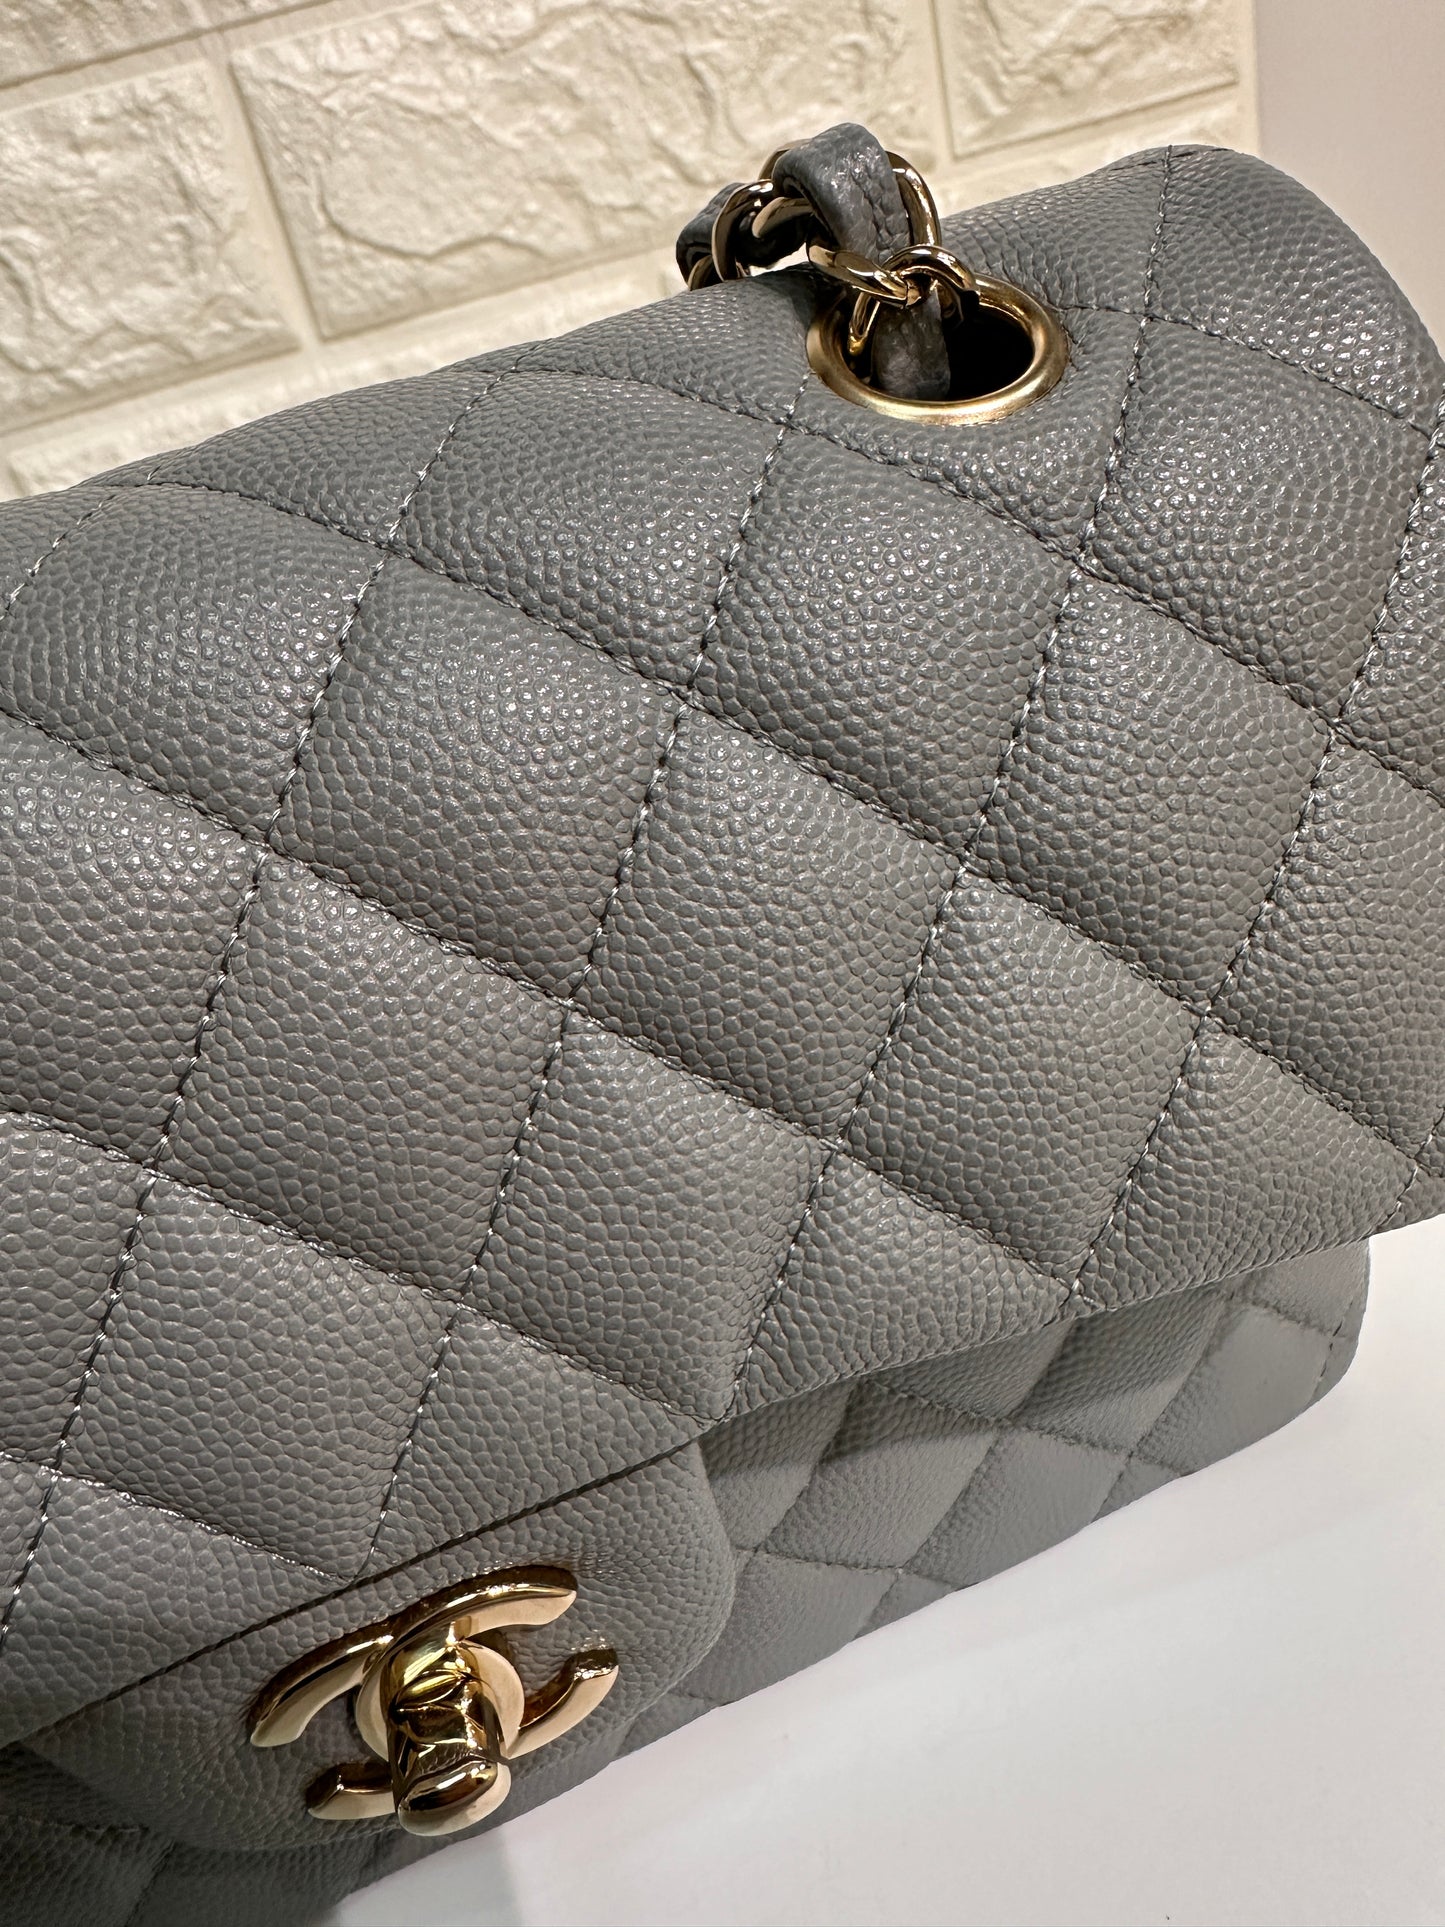 CHANEL Caviar Quilted Small Classic Double Flap Grey